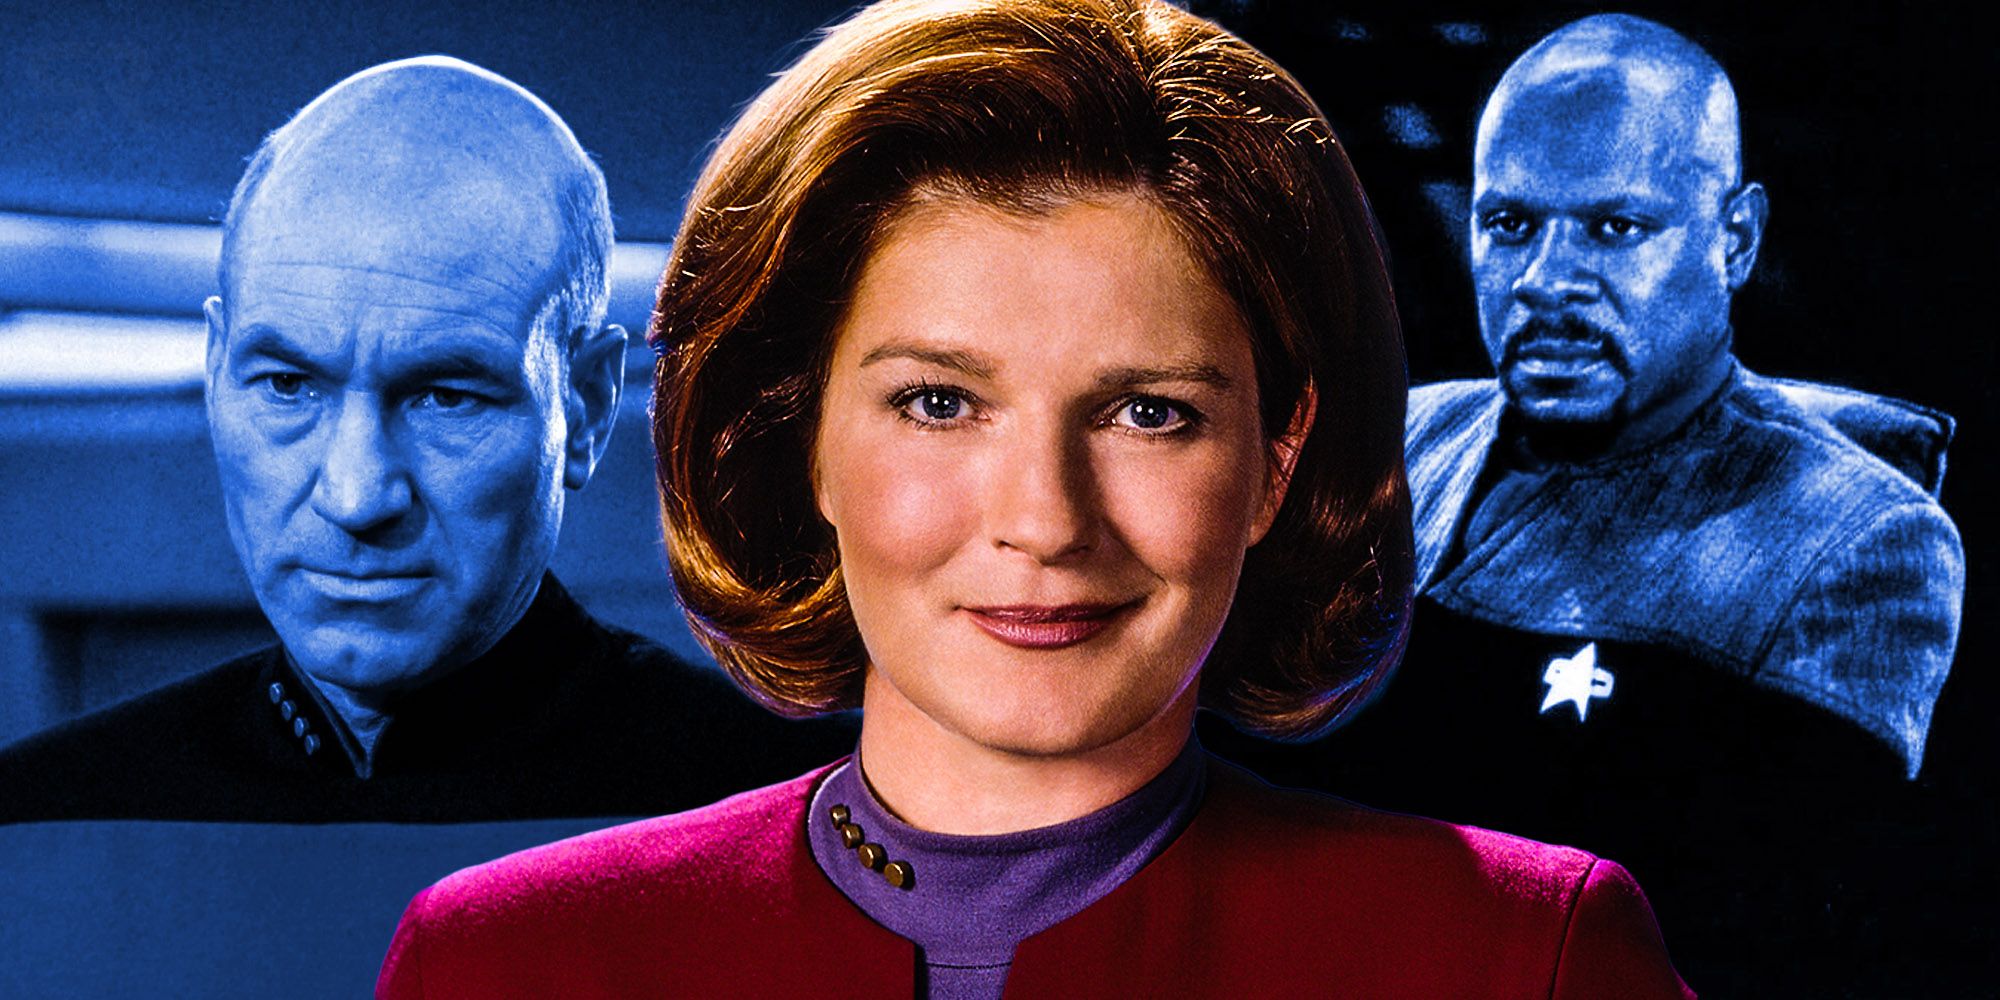 Star Trek: How Old Is Janeway During Prodigy?